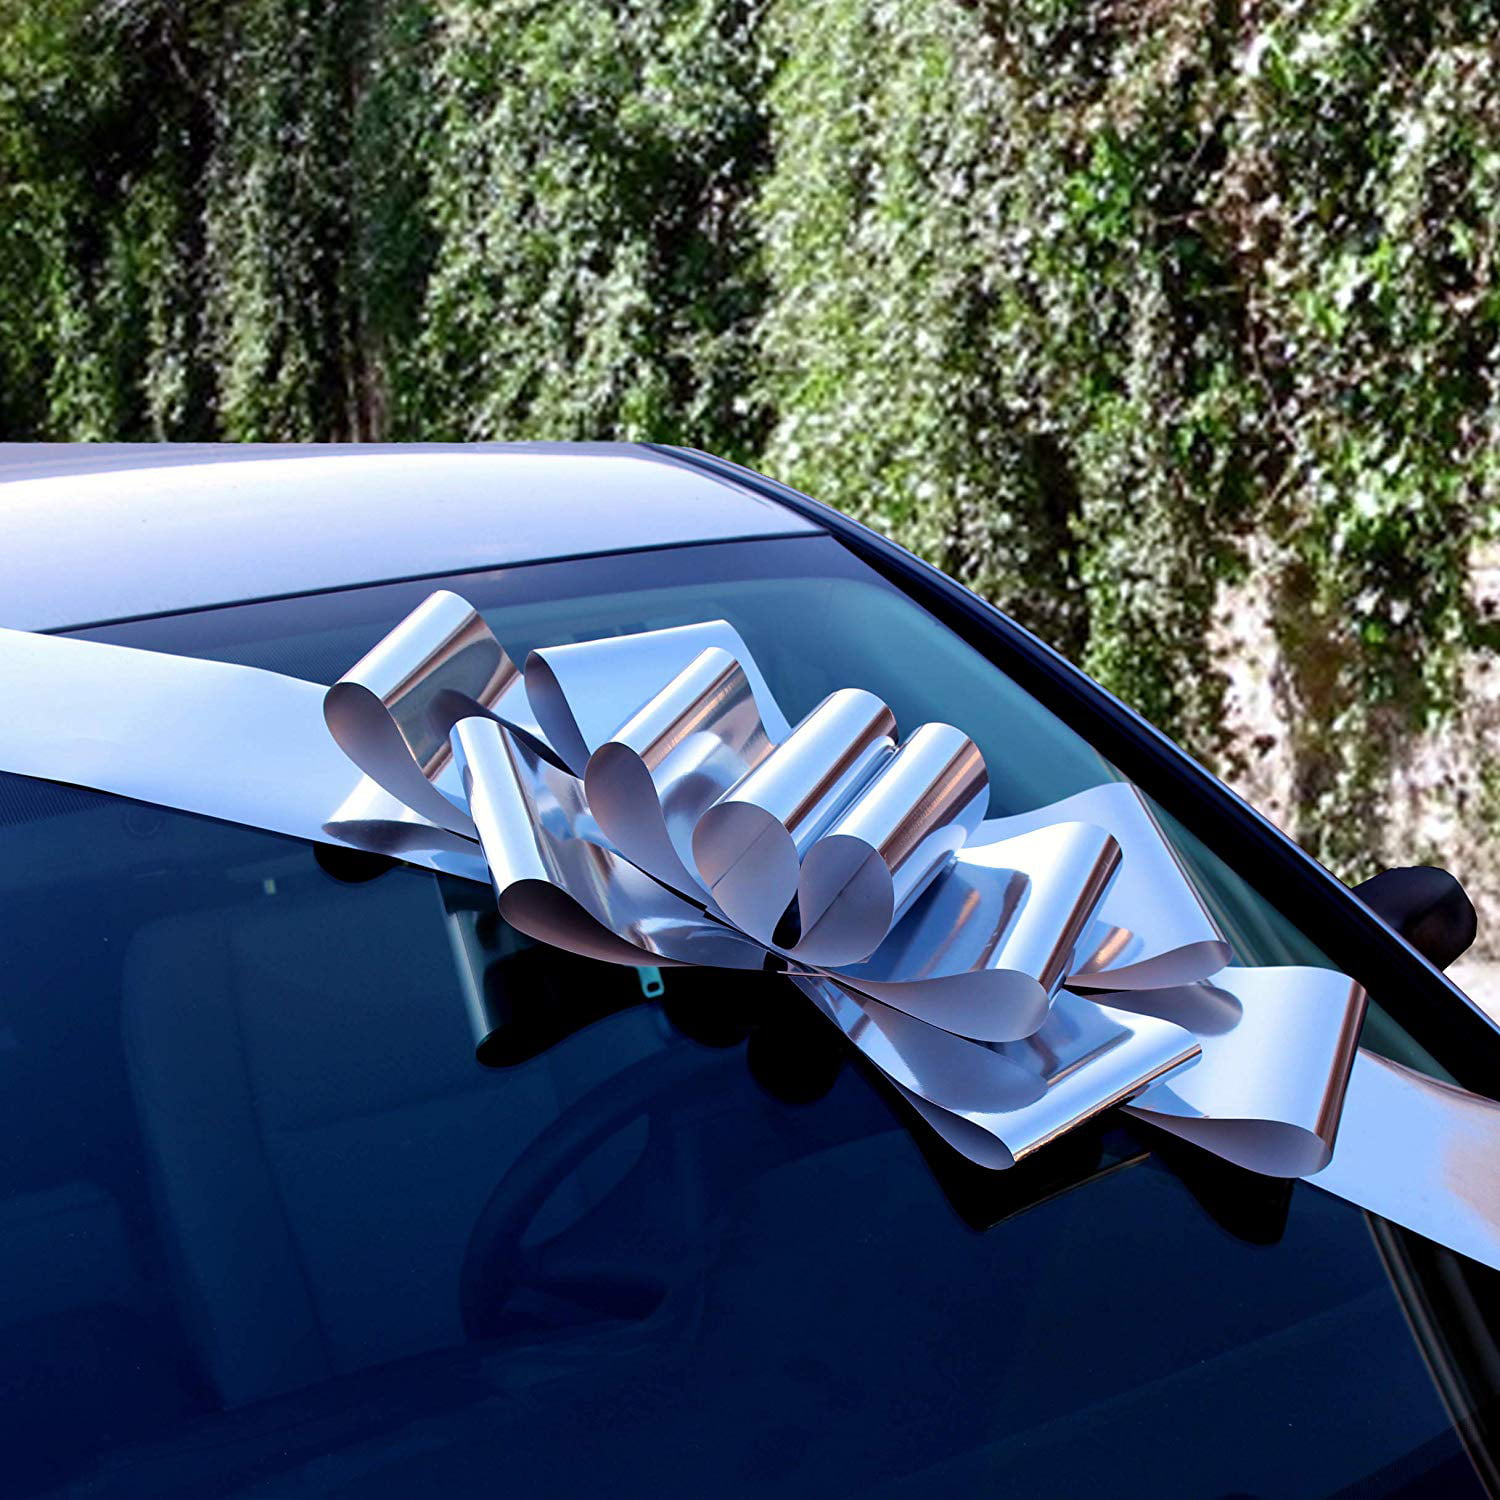 Big Metallic Silver Car Bow - 25 Wide, Fully Assembled, Large